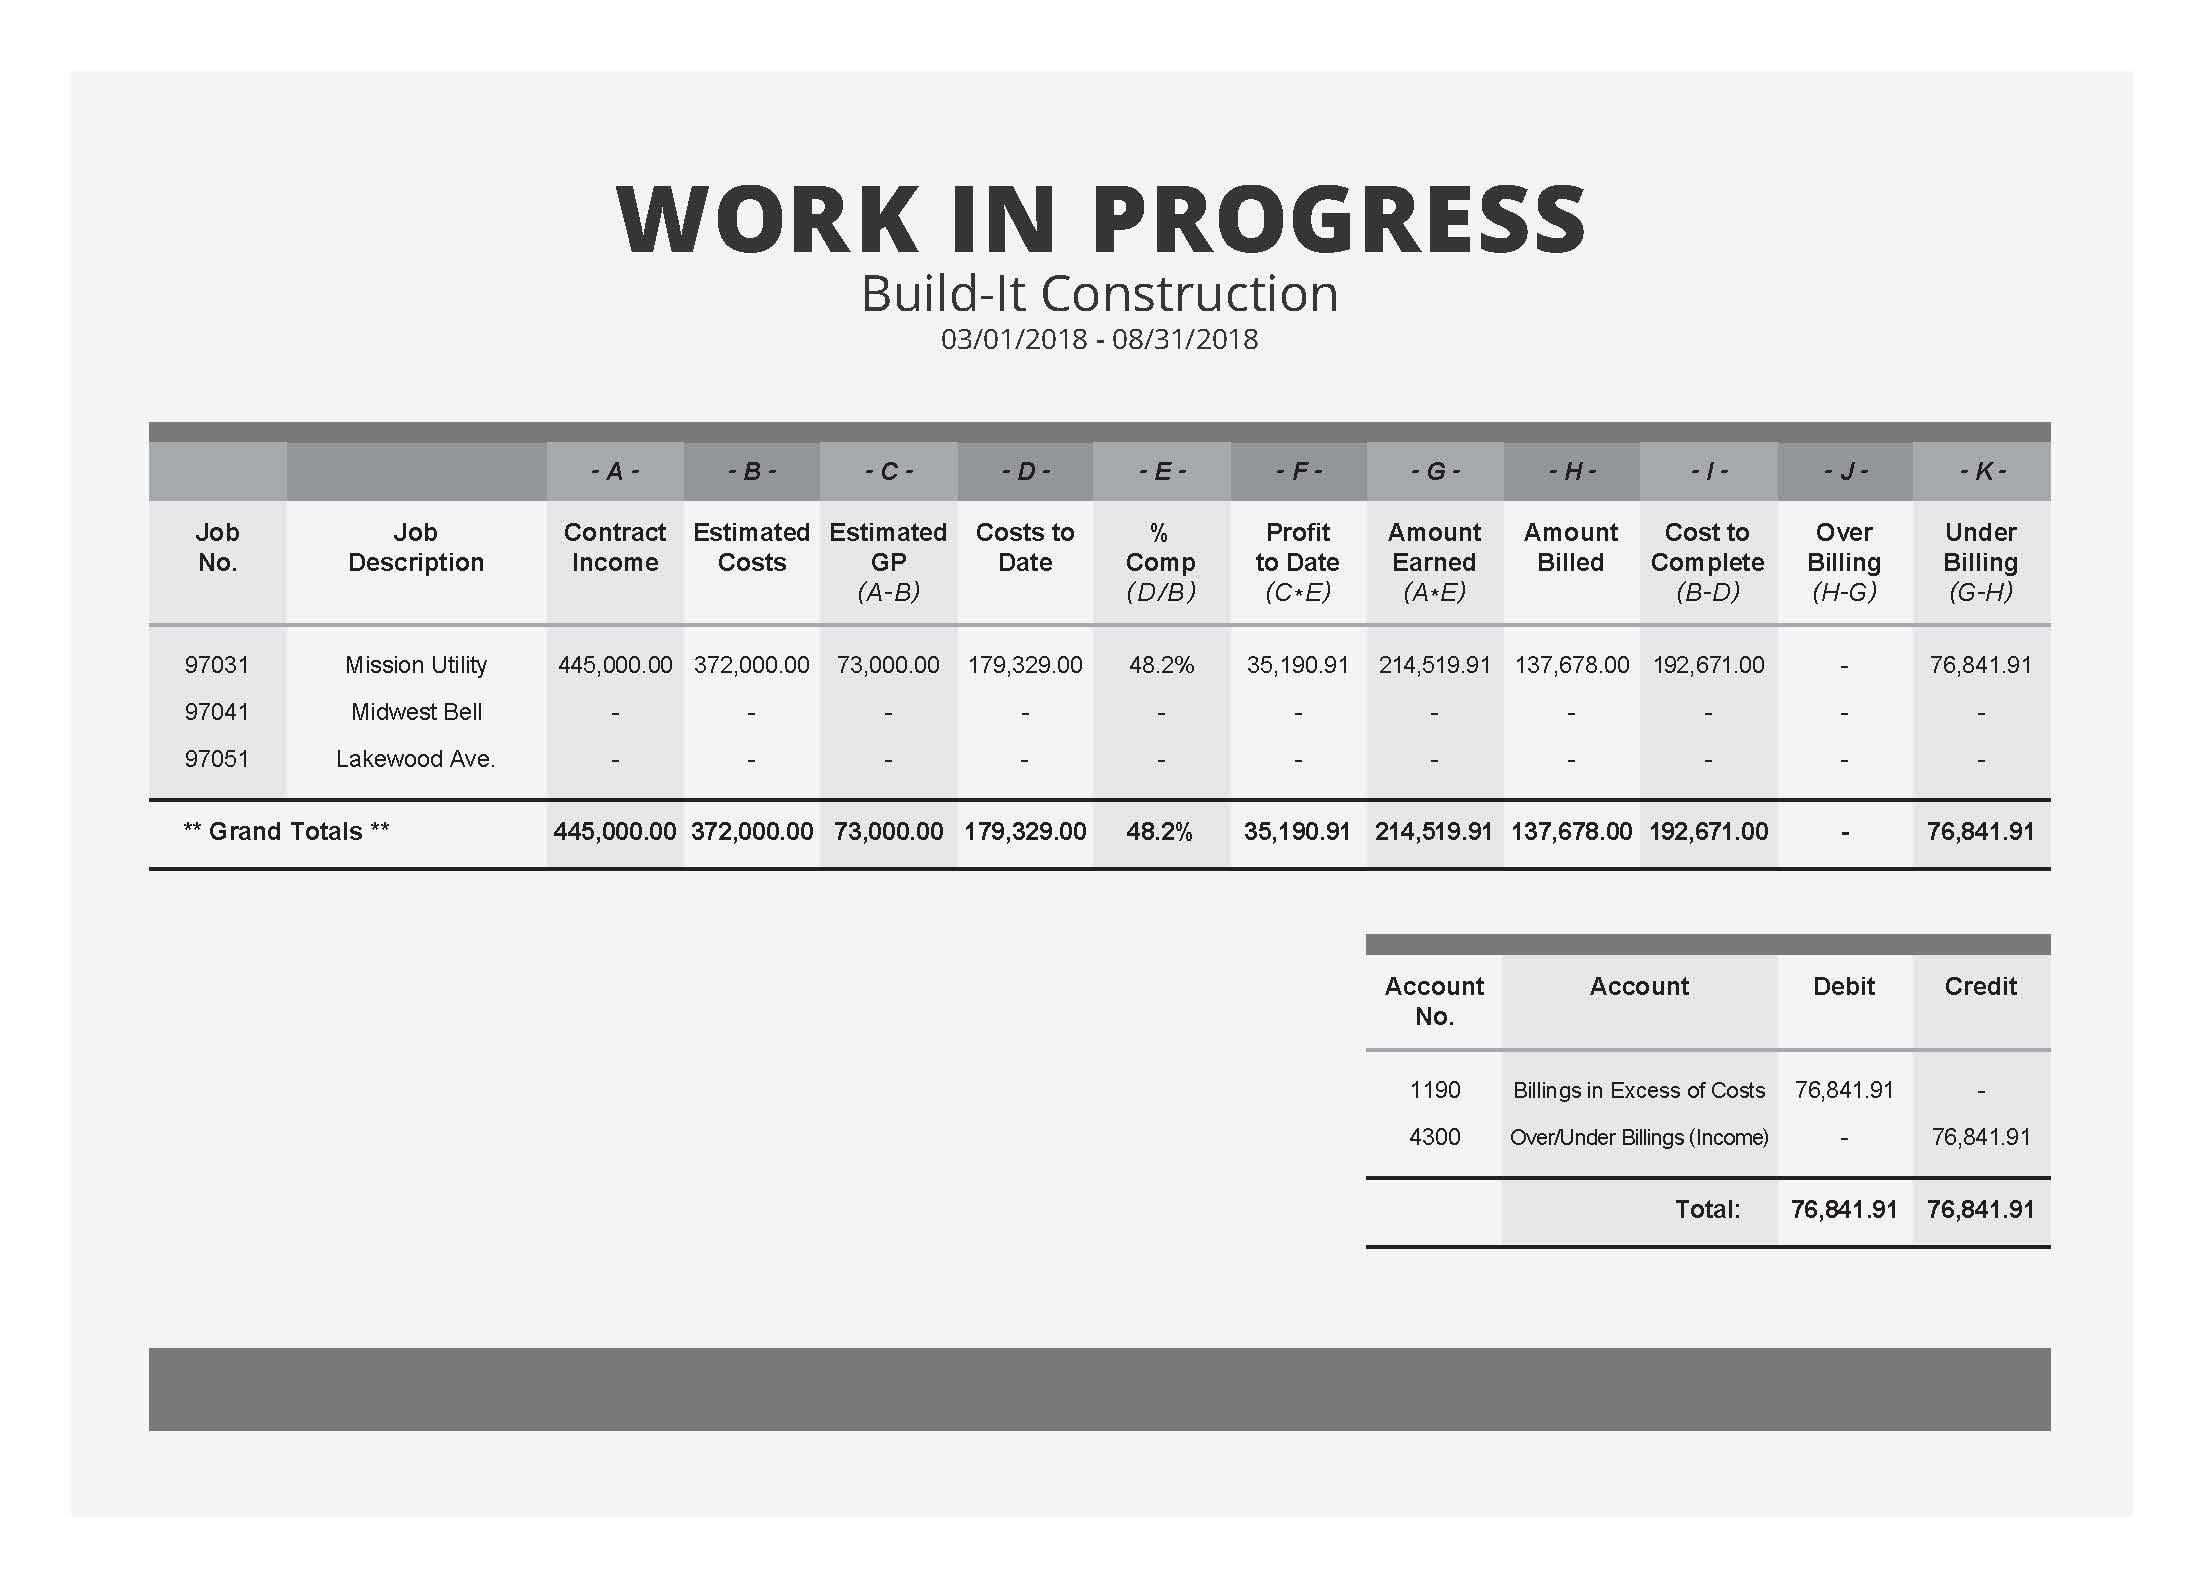 Monthly Progress Report Format For Building Construction In Excel from www.foundationsoft.com